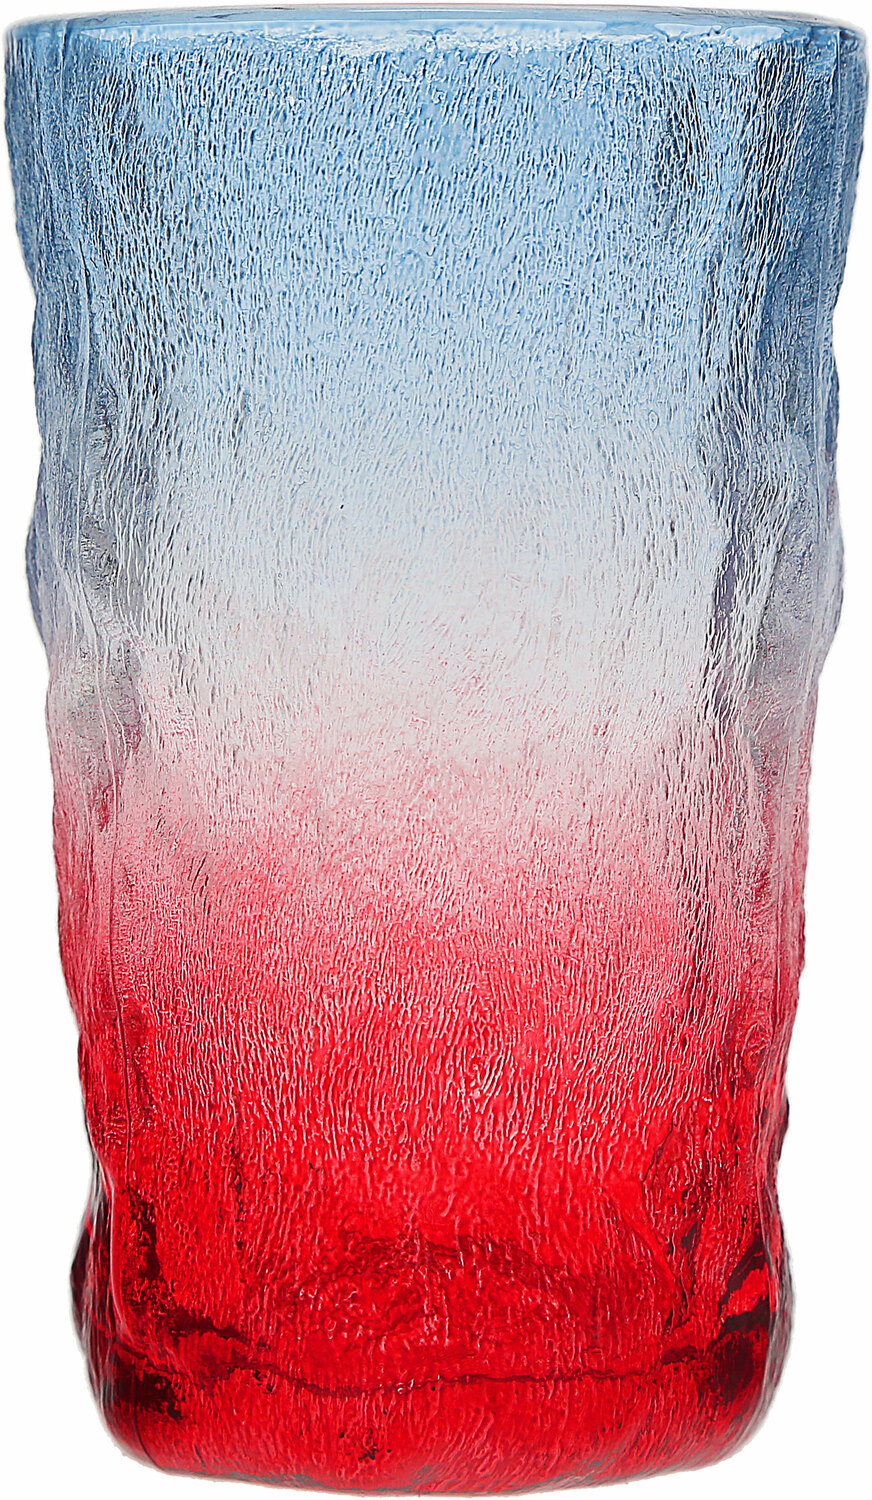 Anchor by We People - Anchor - 12.5 oz Glacier Glass